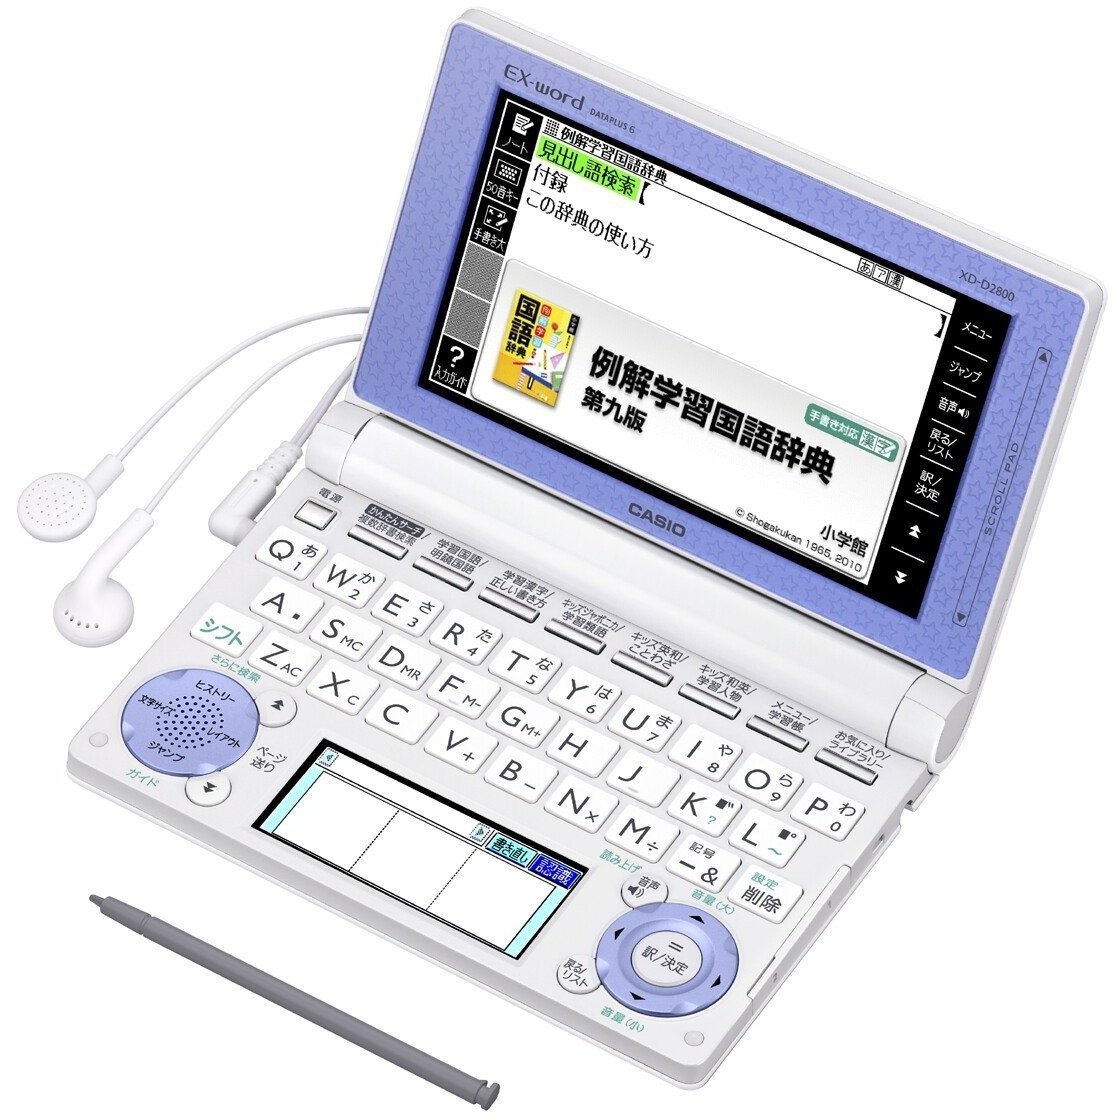 CASIO EX-word XD-D2800WE Japanese English Electronic Dictionary